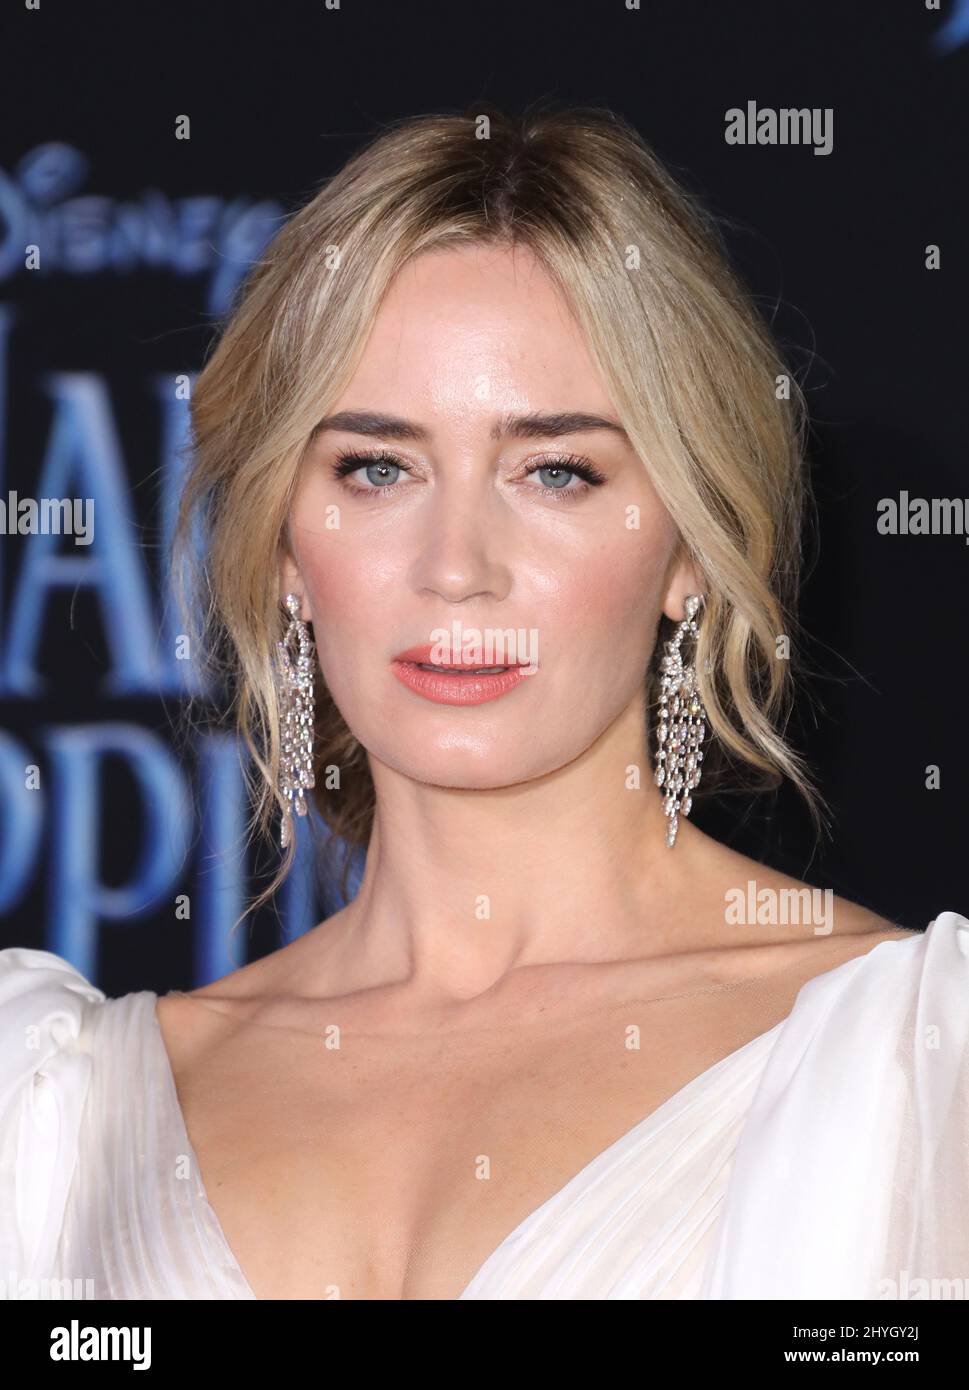 Emily Blunt attending the World Premiere of Mary Poppins Returns in Los Angeles, California Stock Photo